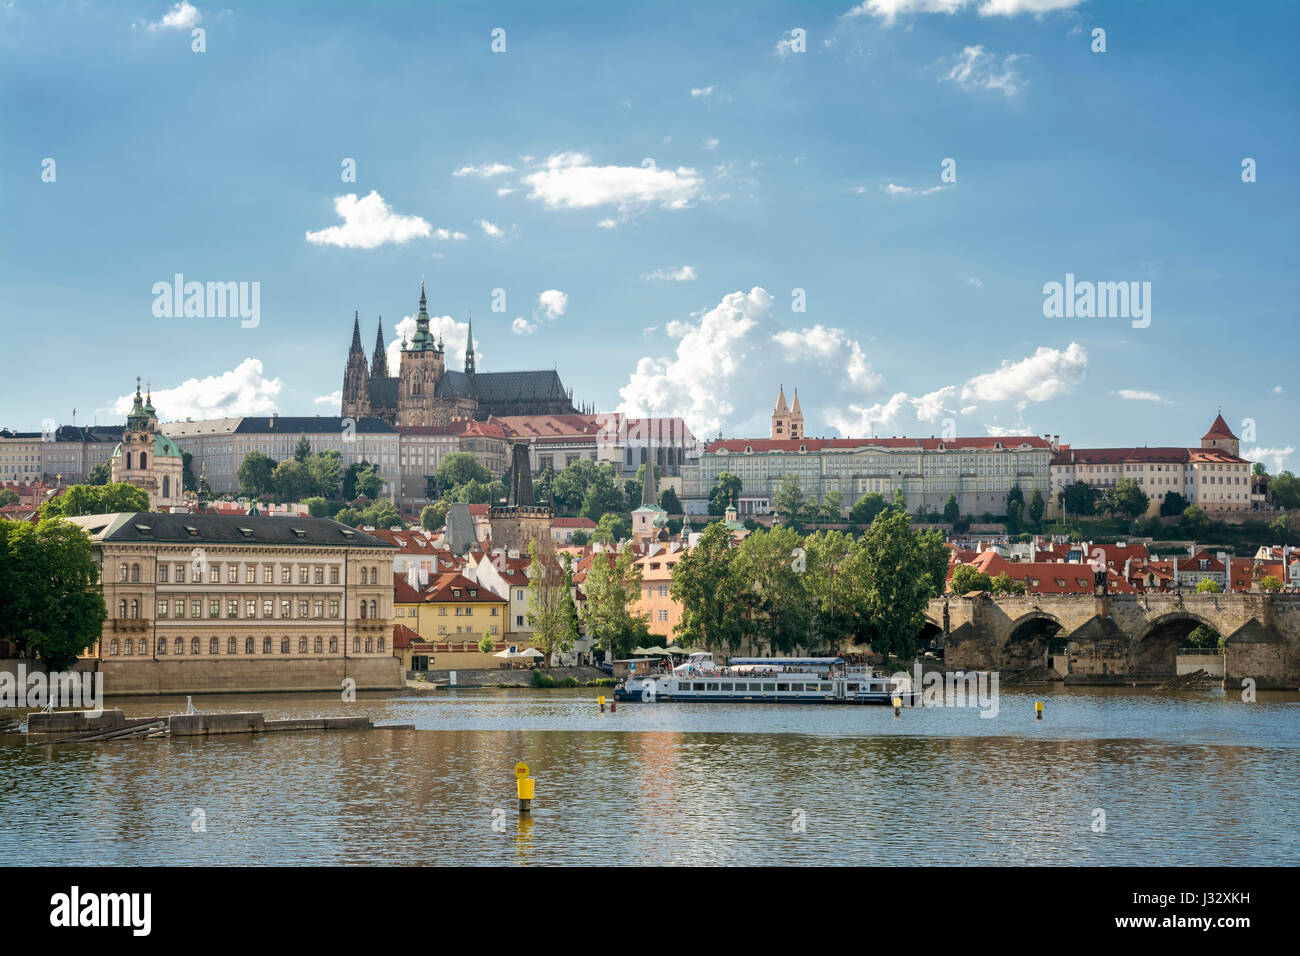 PRAGUE, CZECH REPUBLIC, JULY 5, 2016: Wide angle view of Prague Castle and the tower of St. Vitus Cathedral, famous landmarks of Prague. Stock Photo